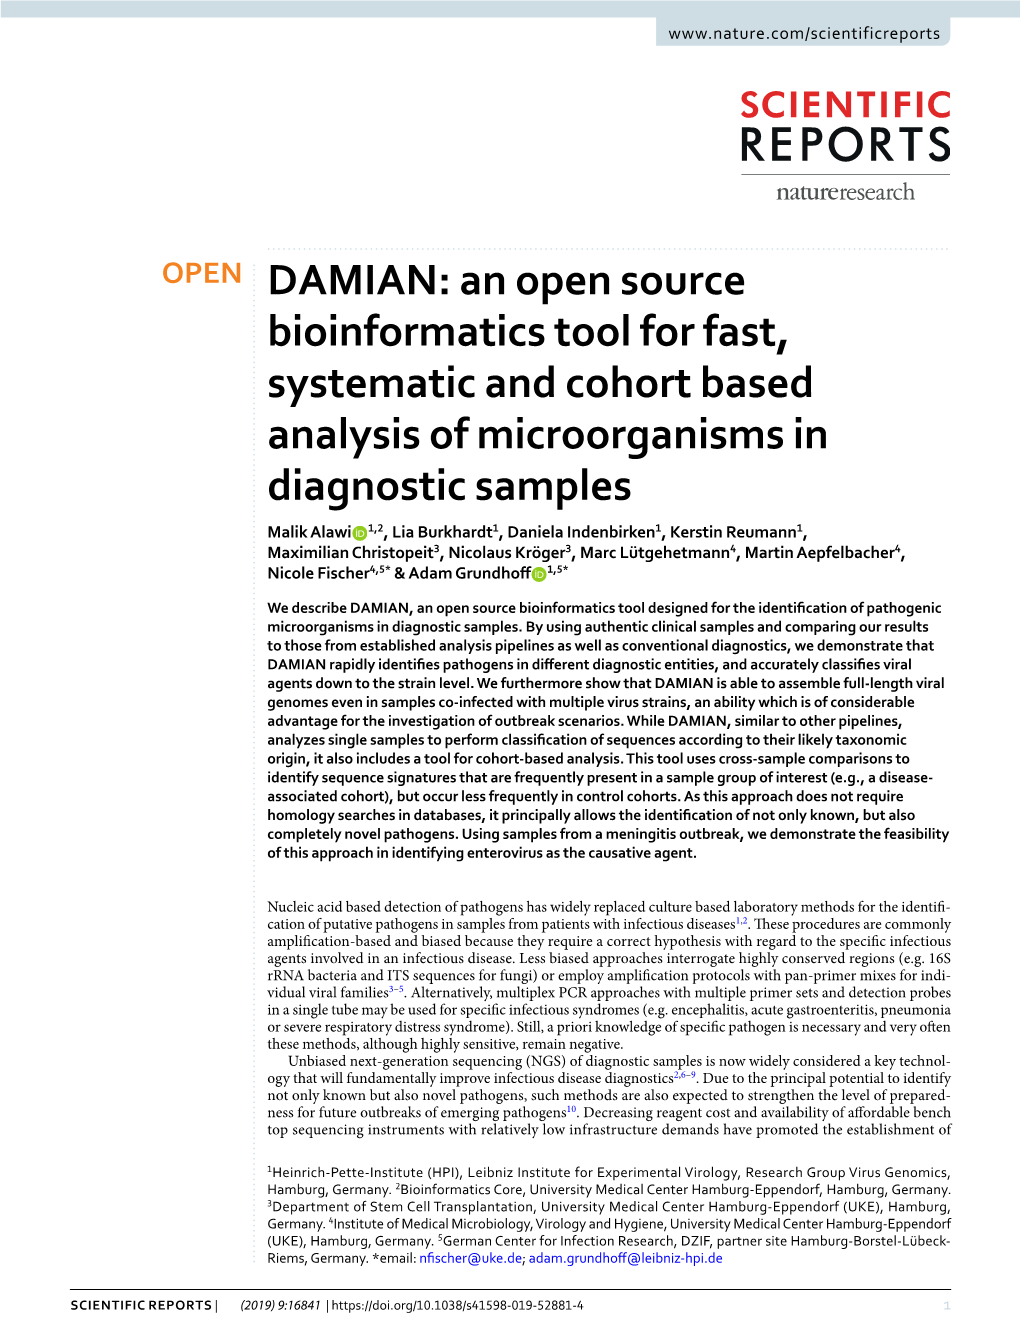 An Open Source Bioinformatics Tool for Fast, Systematic and Cohort Based